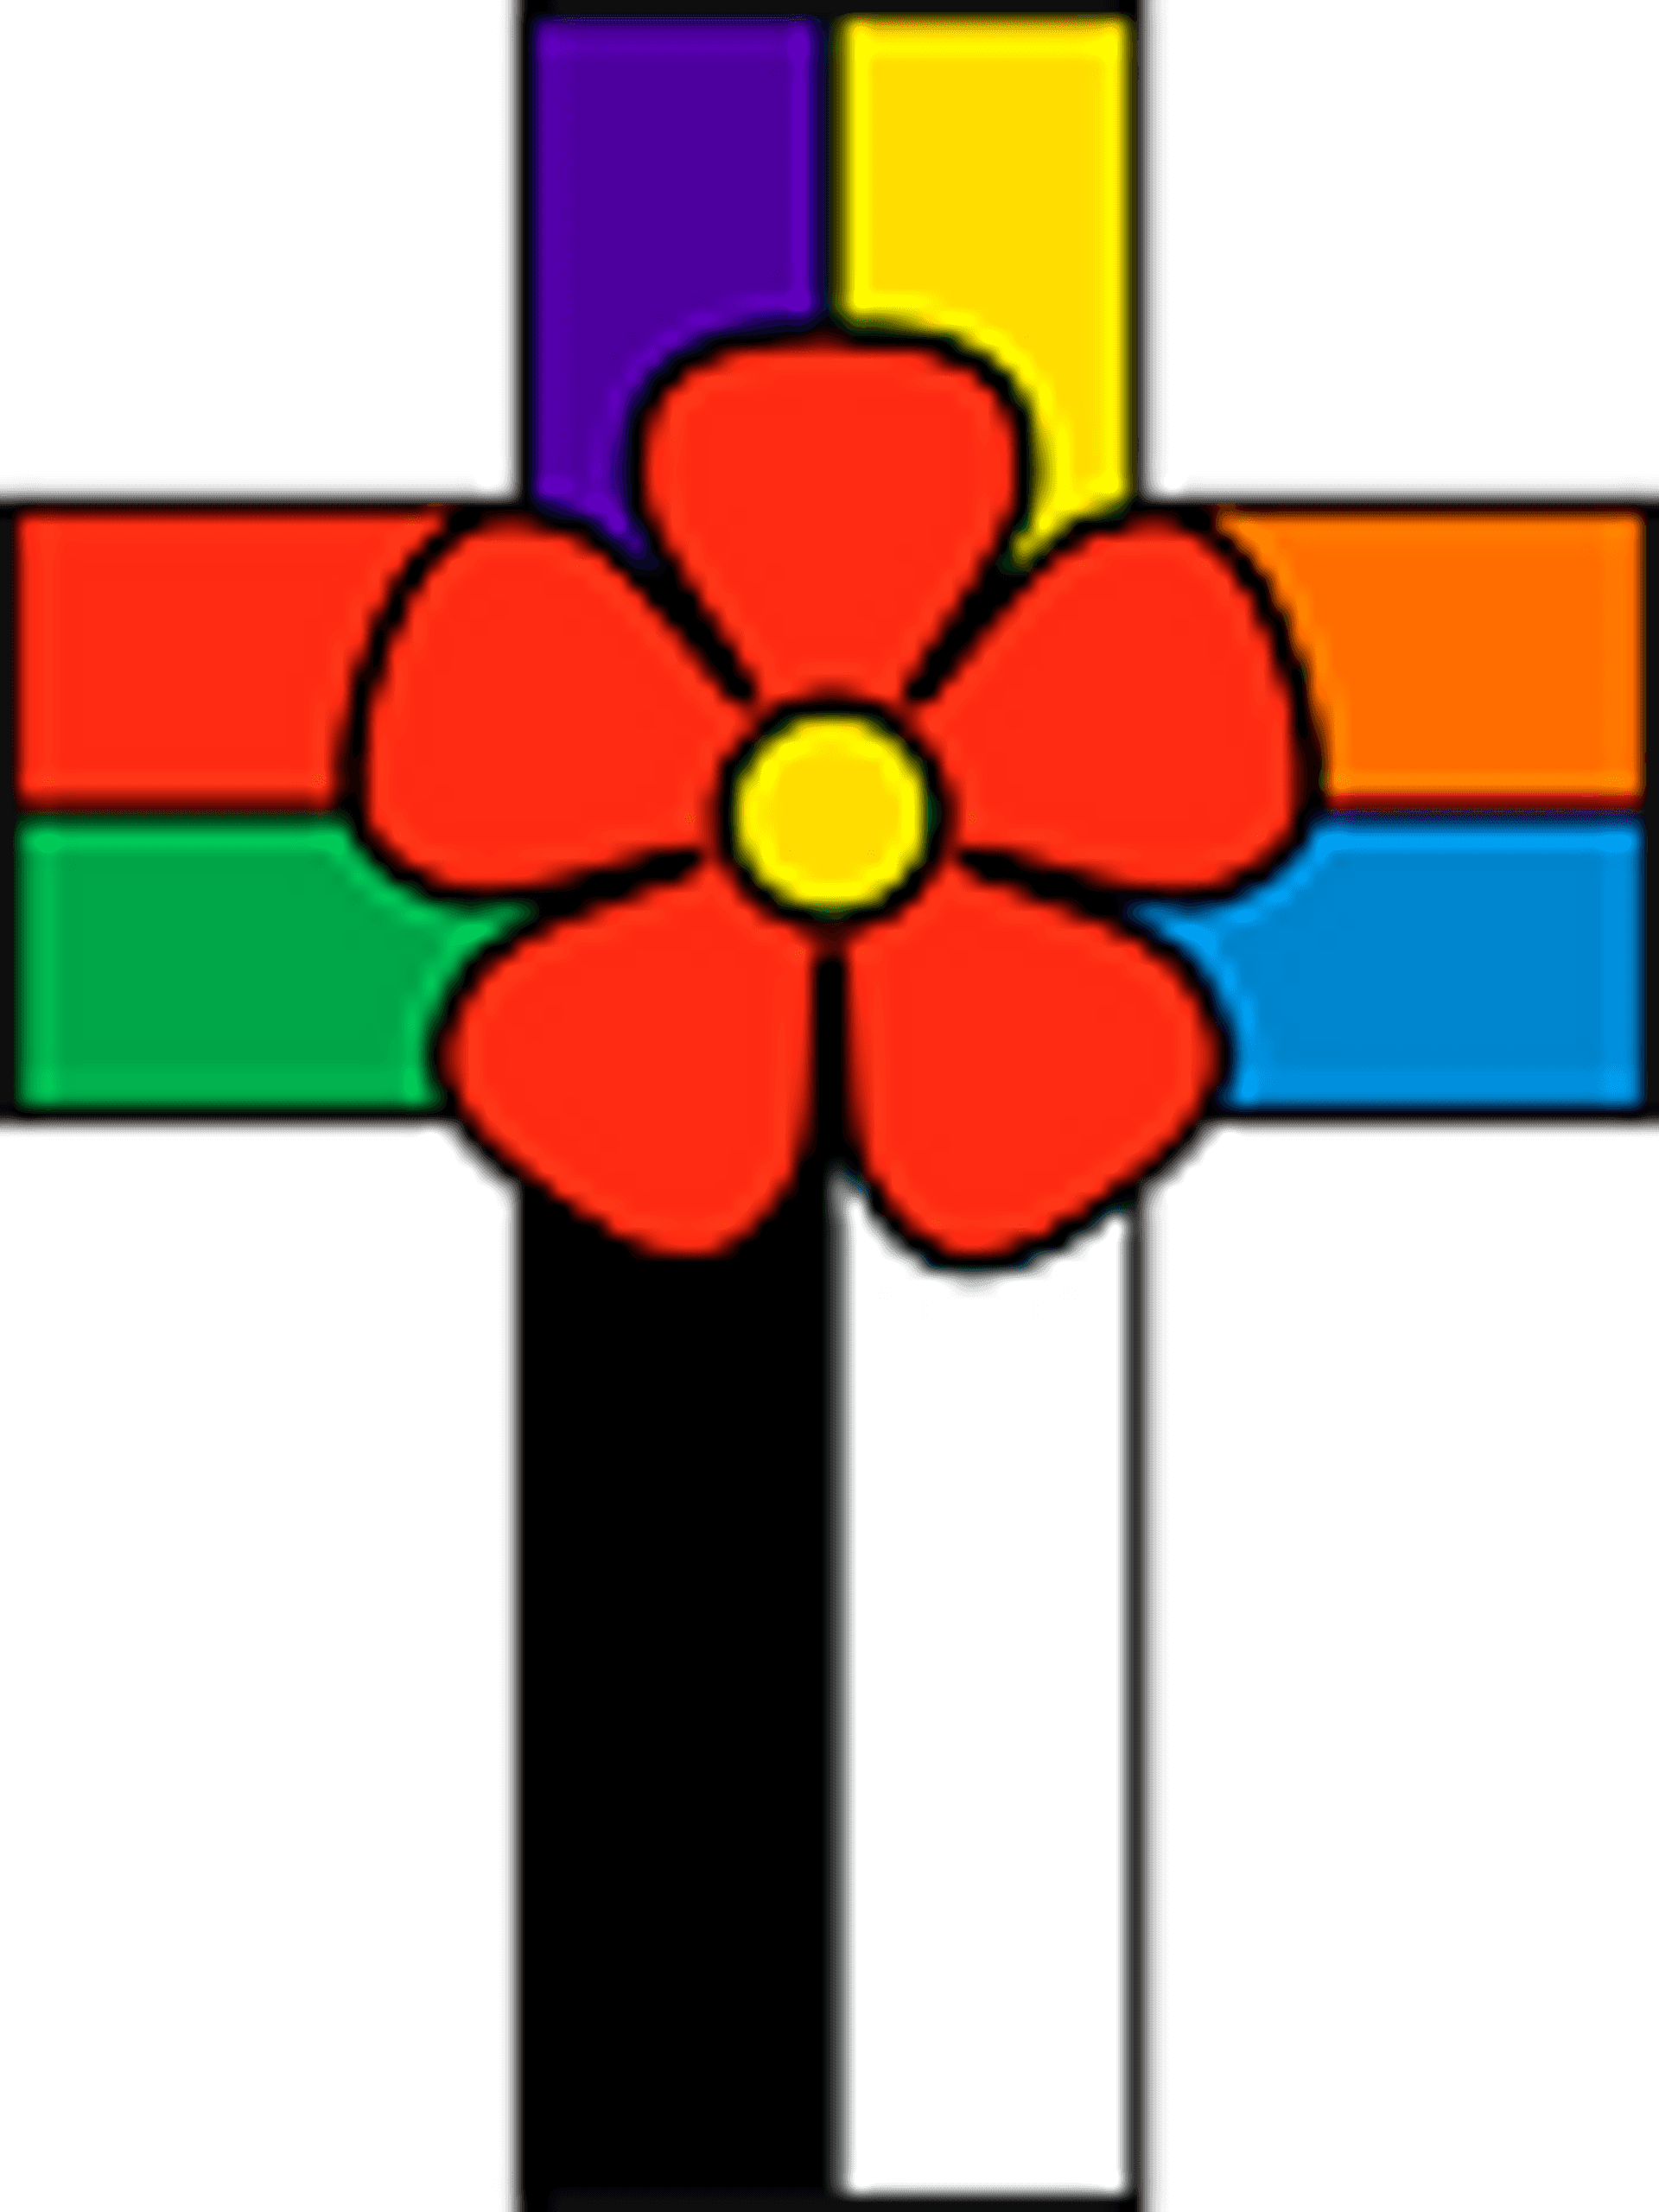 Calvary cross with rose drawn in colors